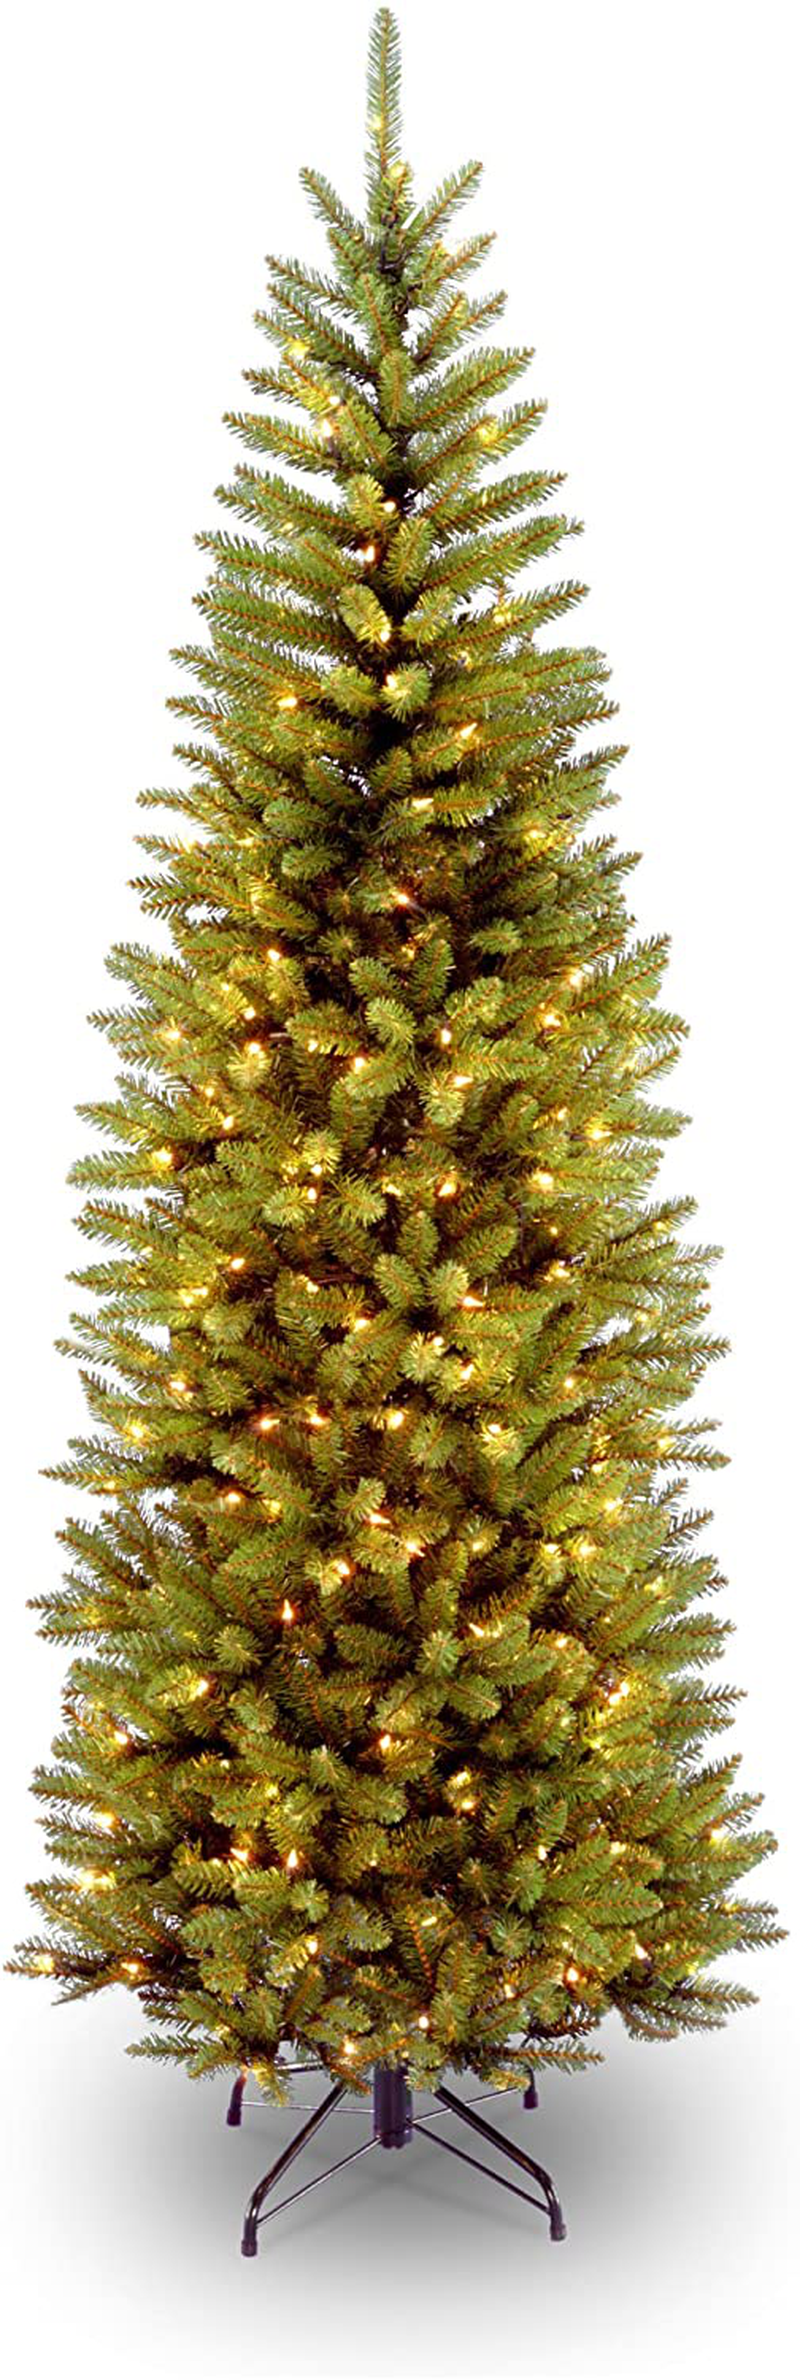 National Tree Company lit Artificial Christmas Tree Includes Pre-Strung White Lights and Stand, 6.5 ft, Green